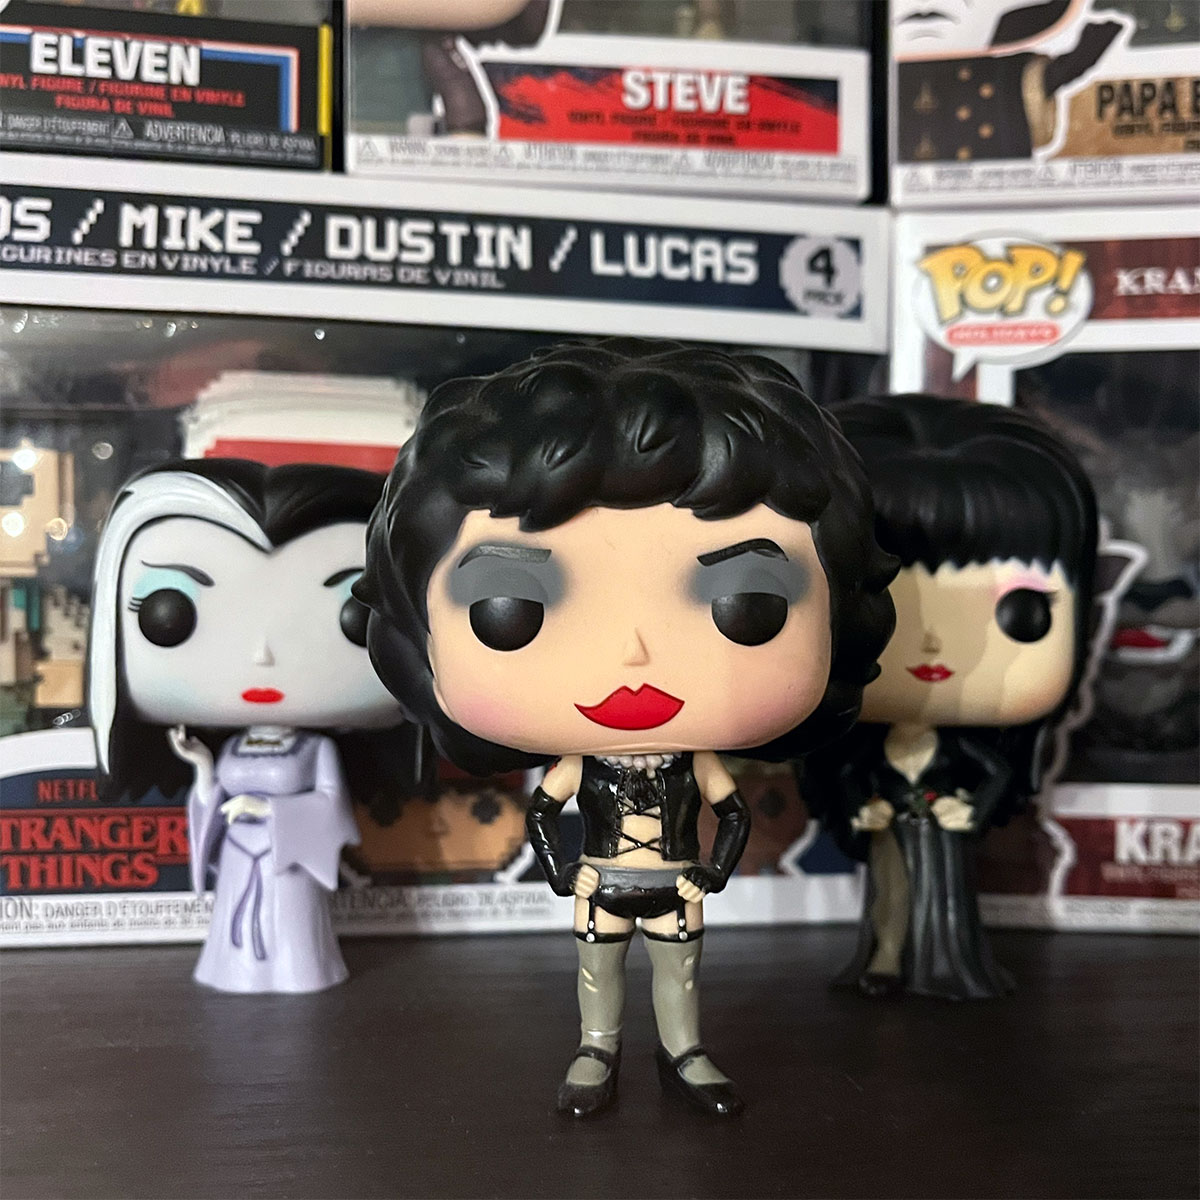 Jamie Pearson's Funko Pops!, including Dr. Frank-N-Furter, Lily Munster, and Elvira, all placed before a selection of Pop! boxes.